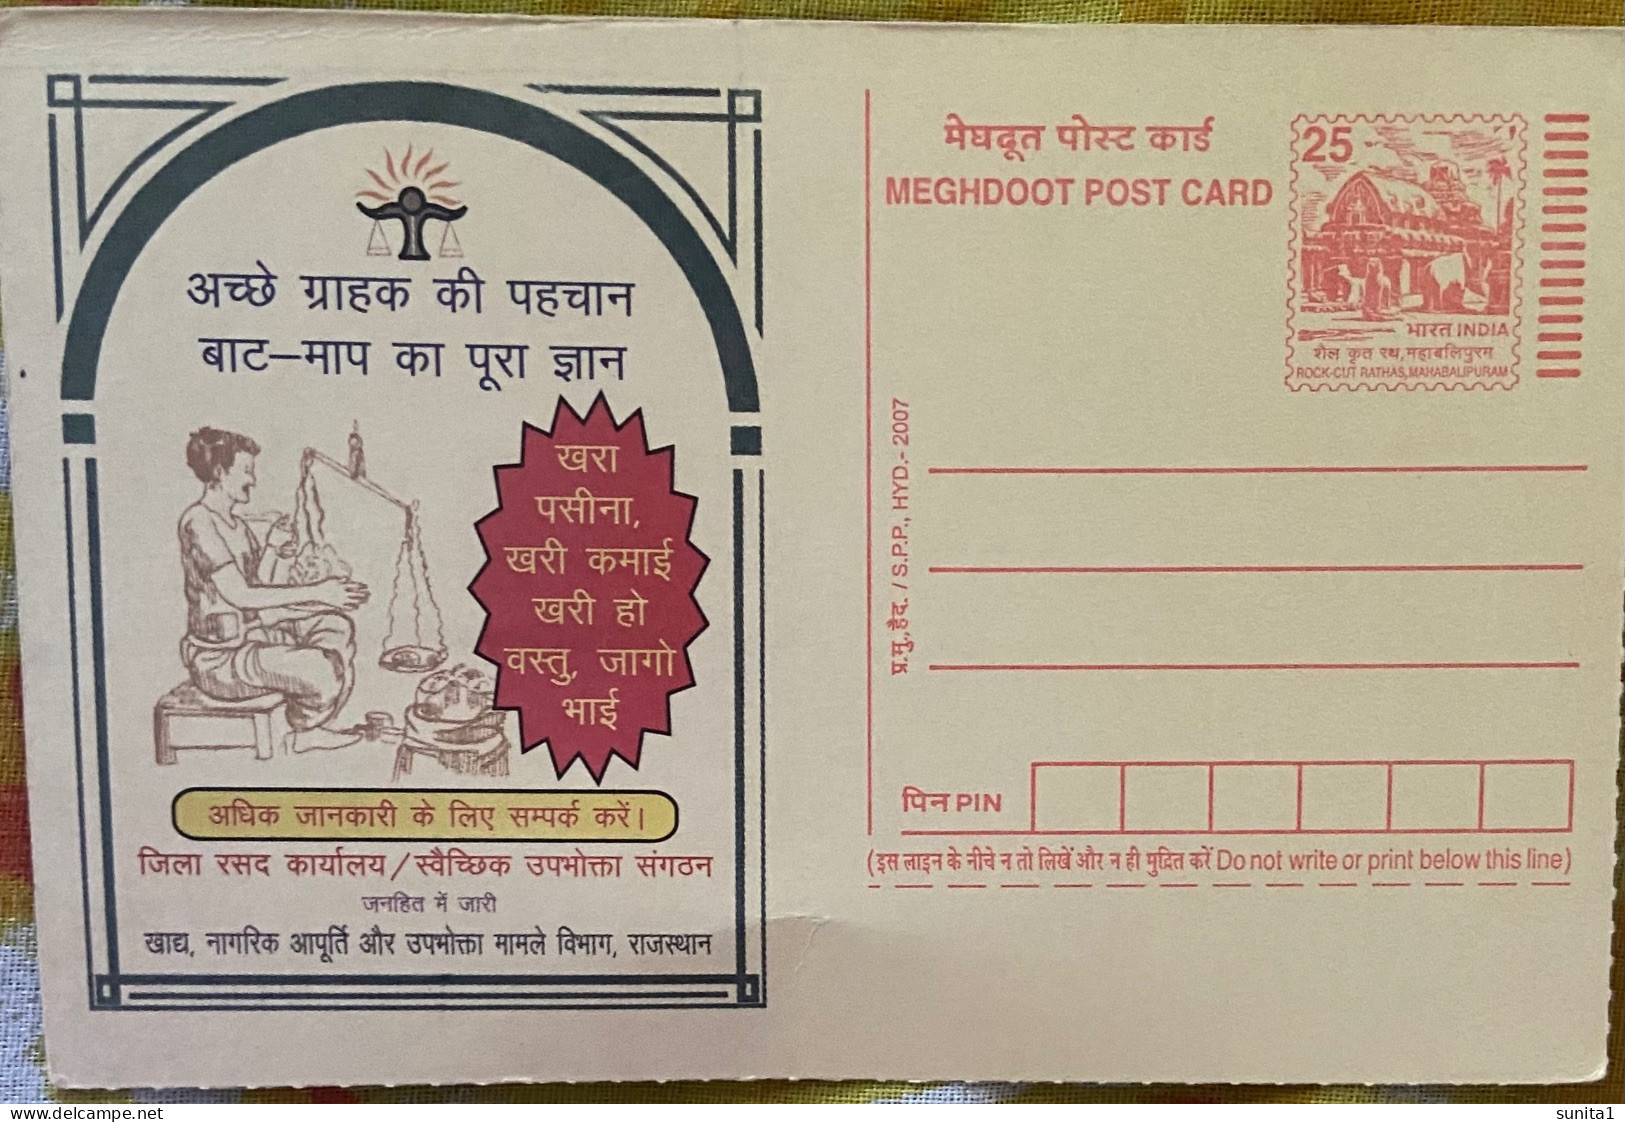 Weighing Scale, Weights, Shopkeeper, Street Vendor, Consumer Rights, Awareness,, Meghdoot, Postal Stationery, India - Food